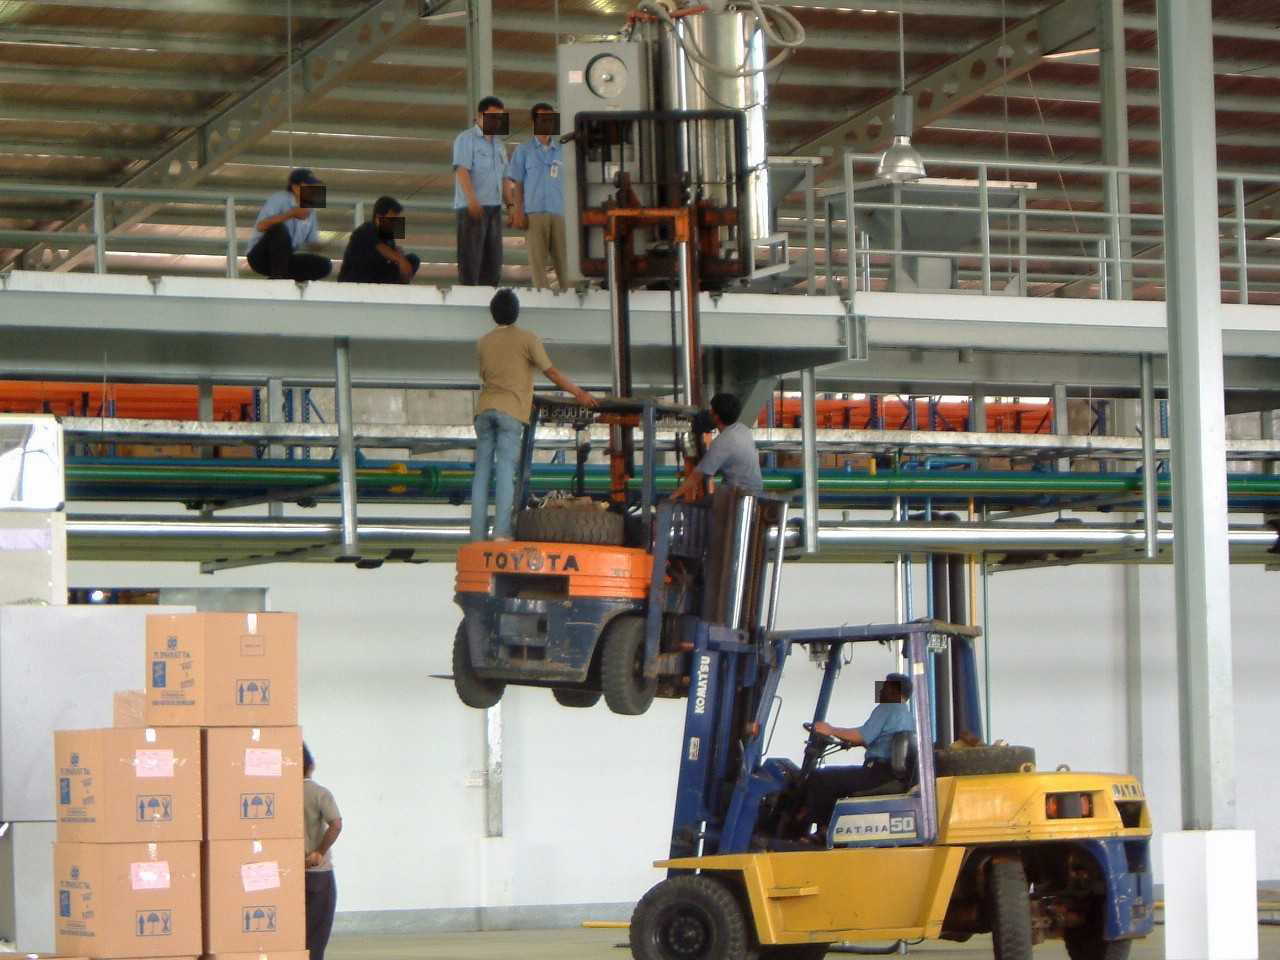 A forklift picking up another forklift which has lifted some equipment